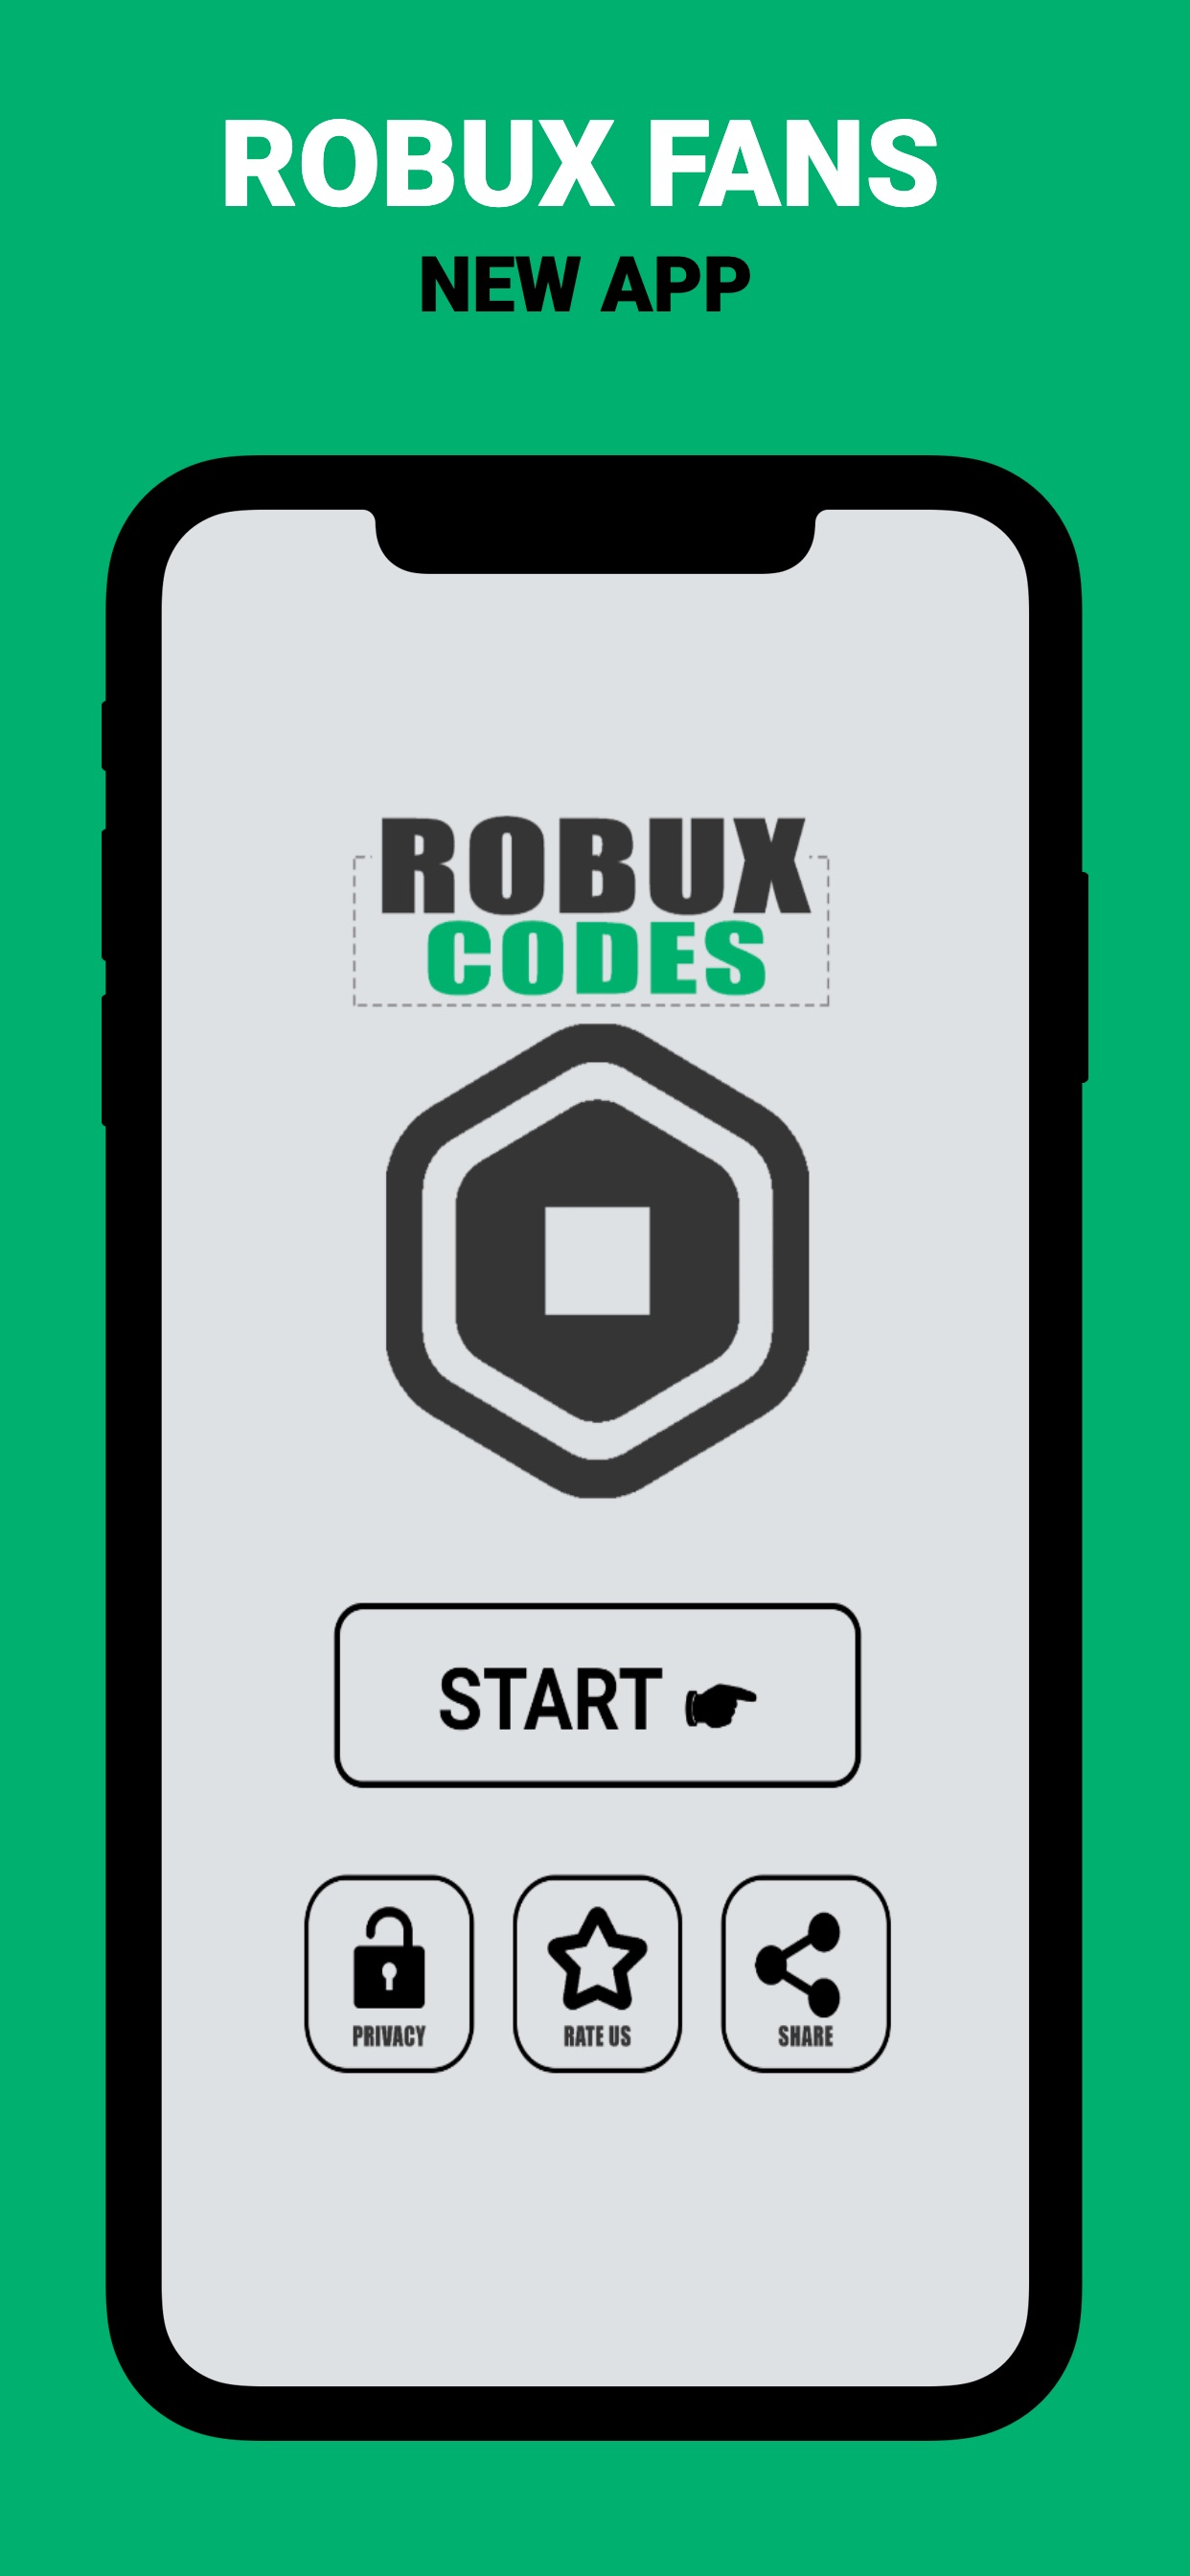 Robux Codes For Roblox App Store Review Aso Revenue Downloads Appfollow - robux codes for roblox app store review aso revenue downloads appfollow